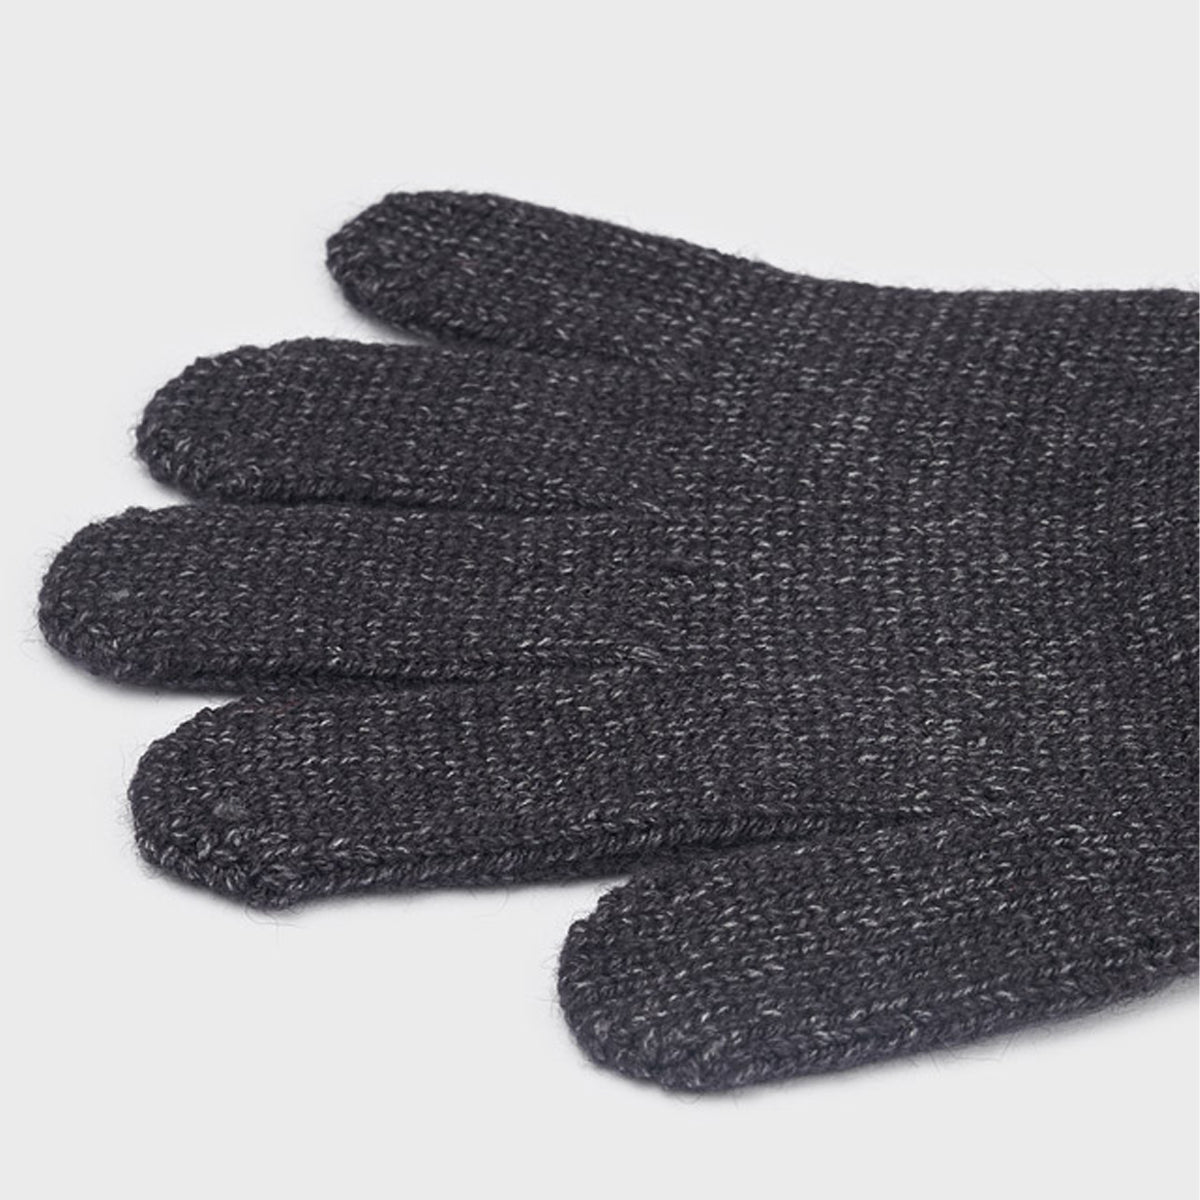 Fossil Grey Gloves